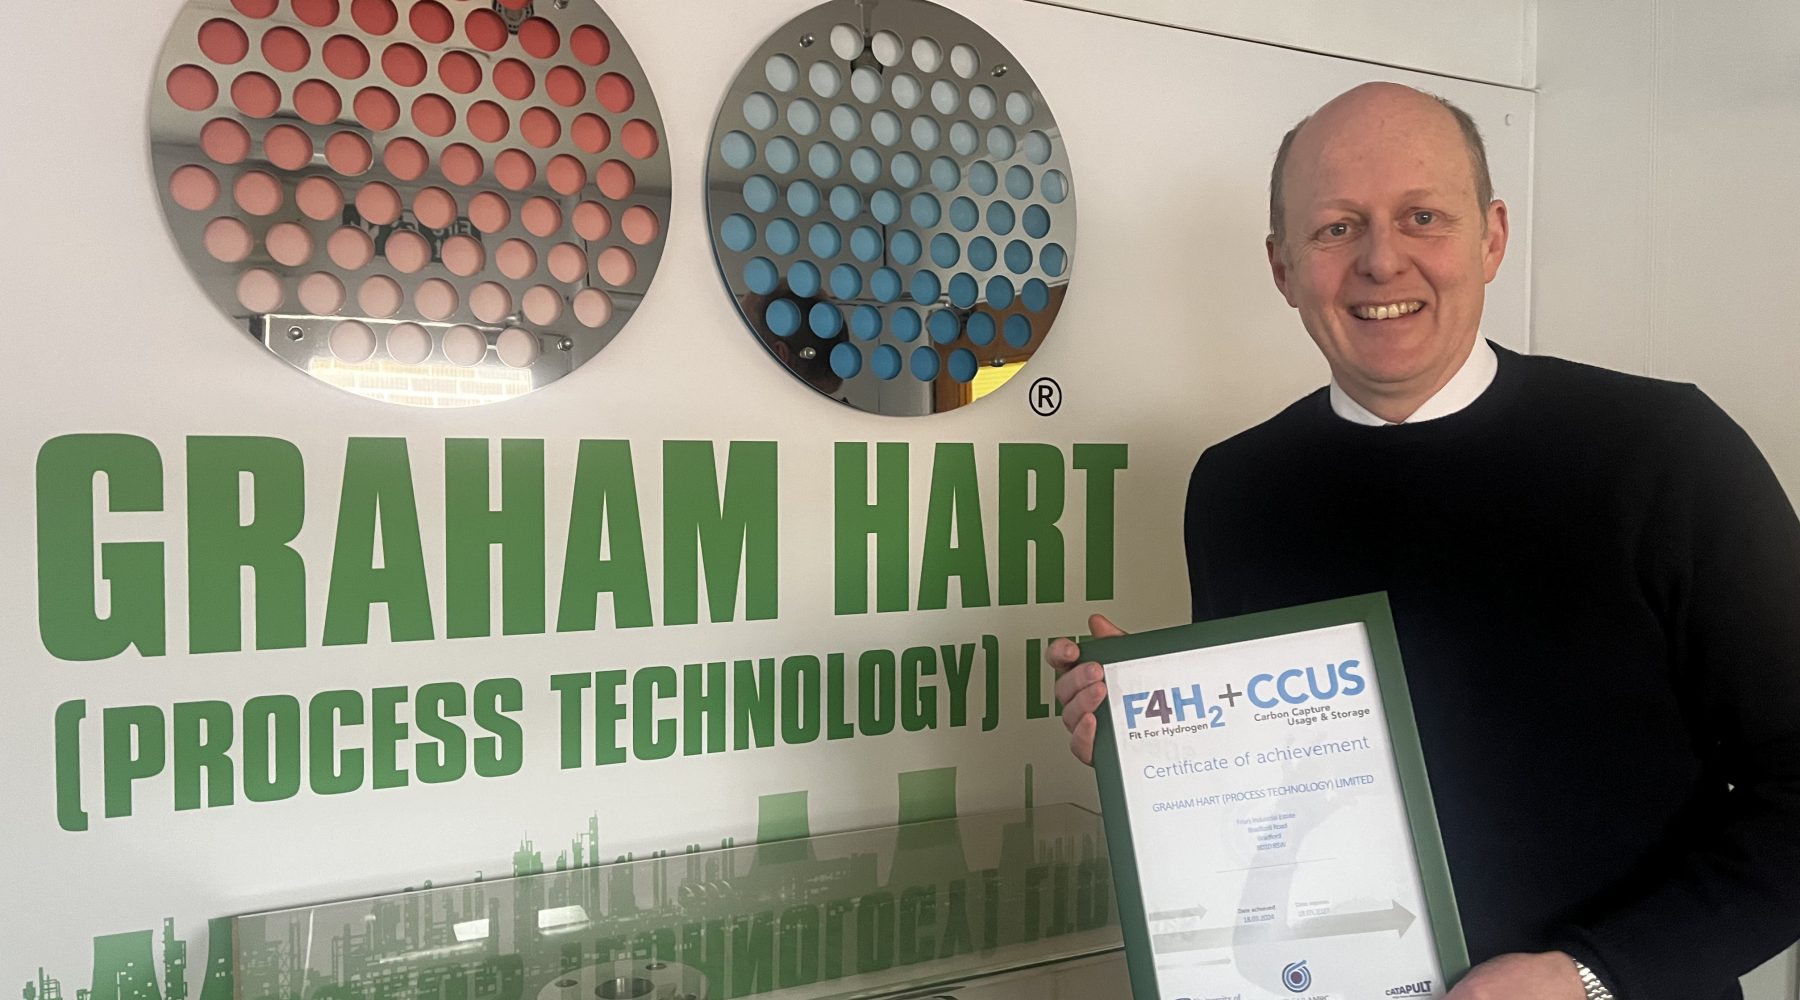 Heat transfer manufacturing specialist wins seal of approval